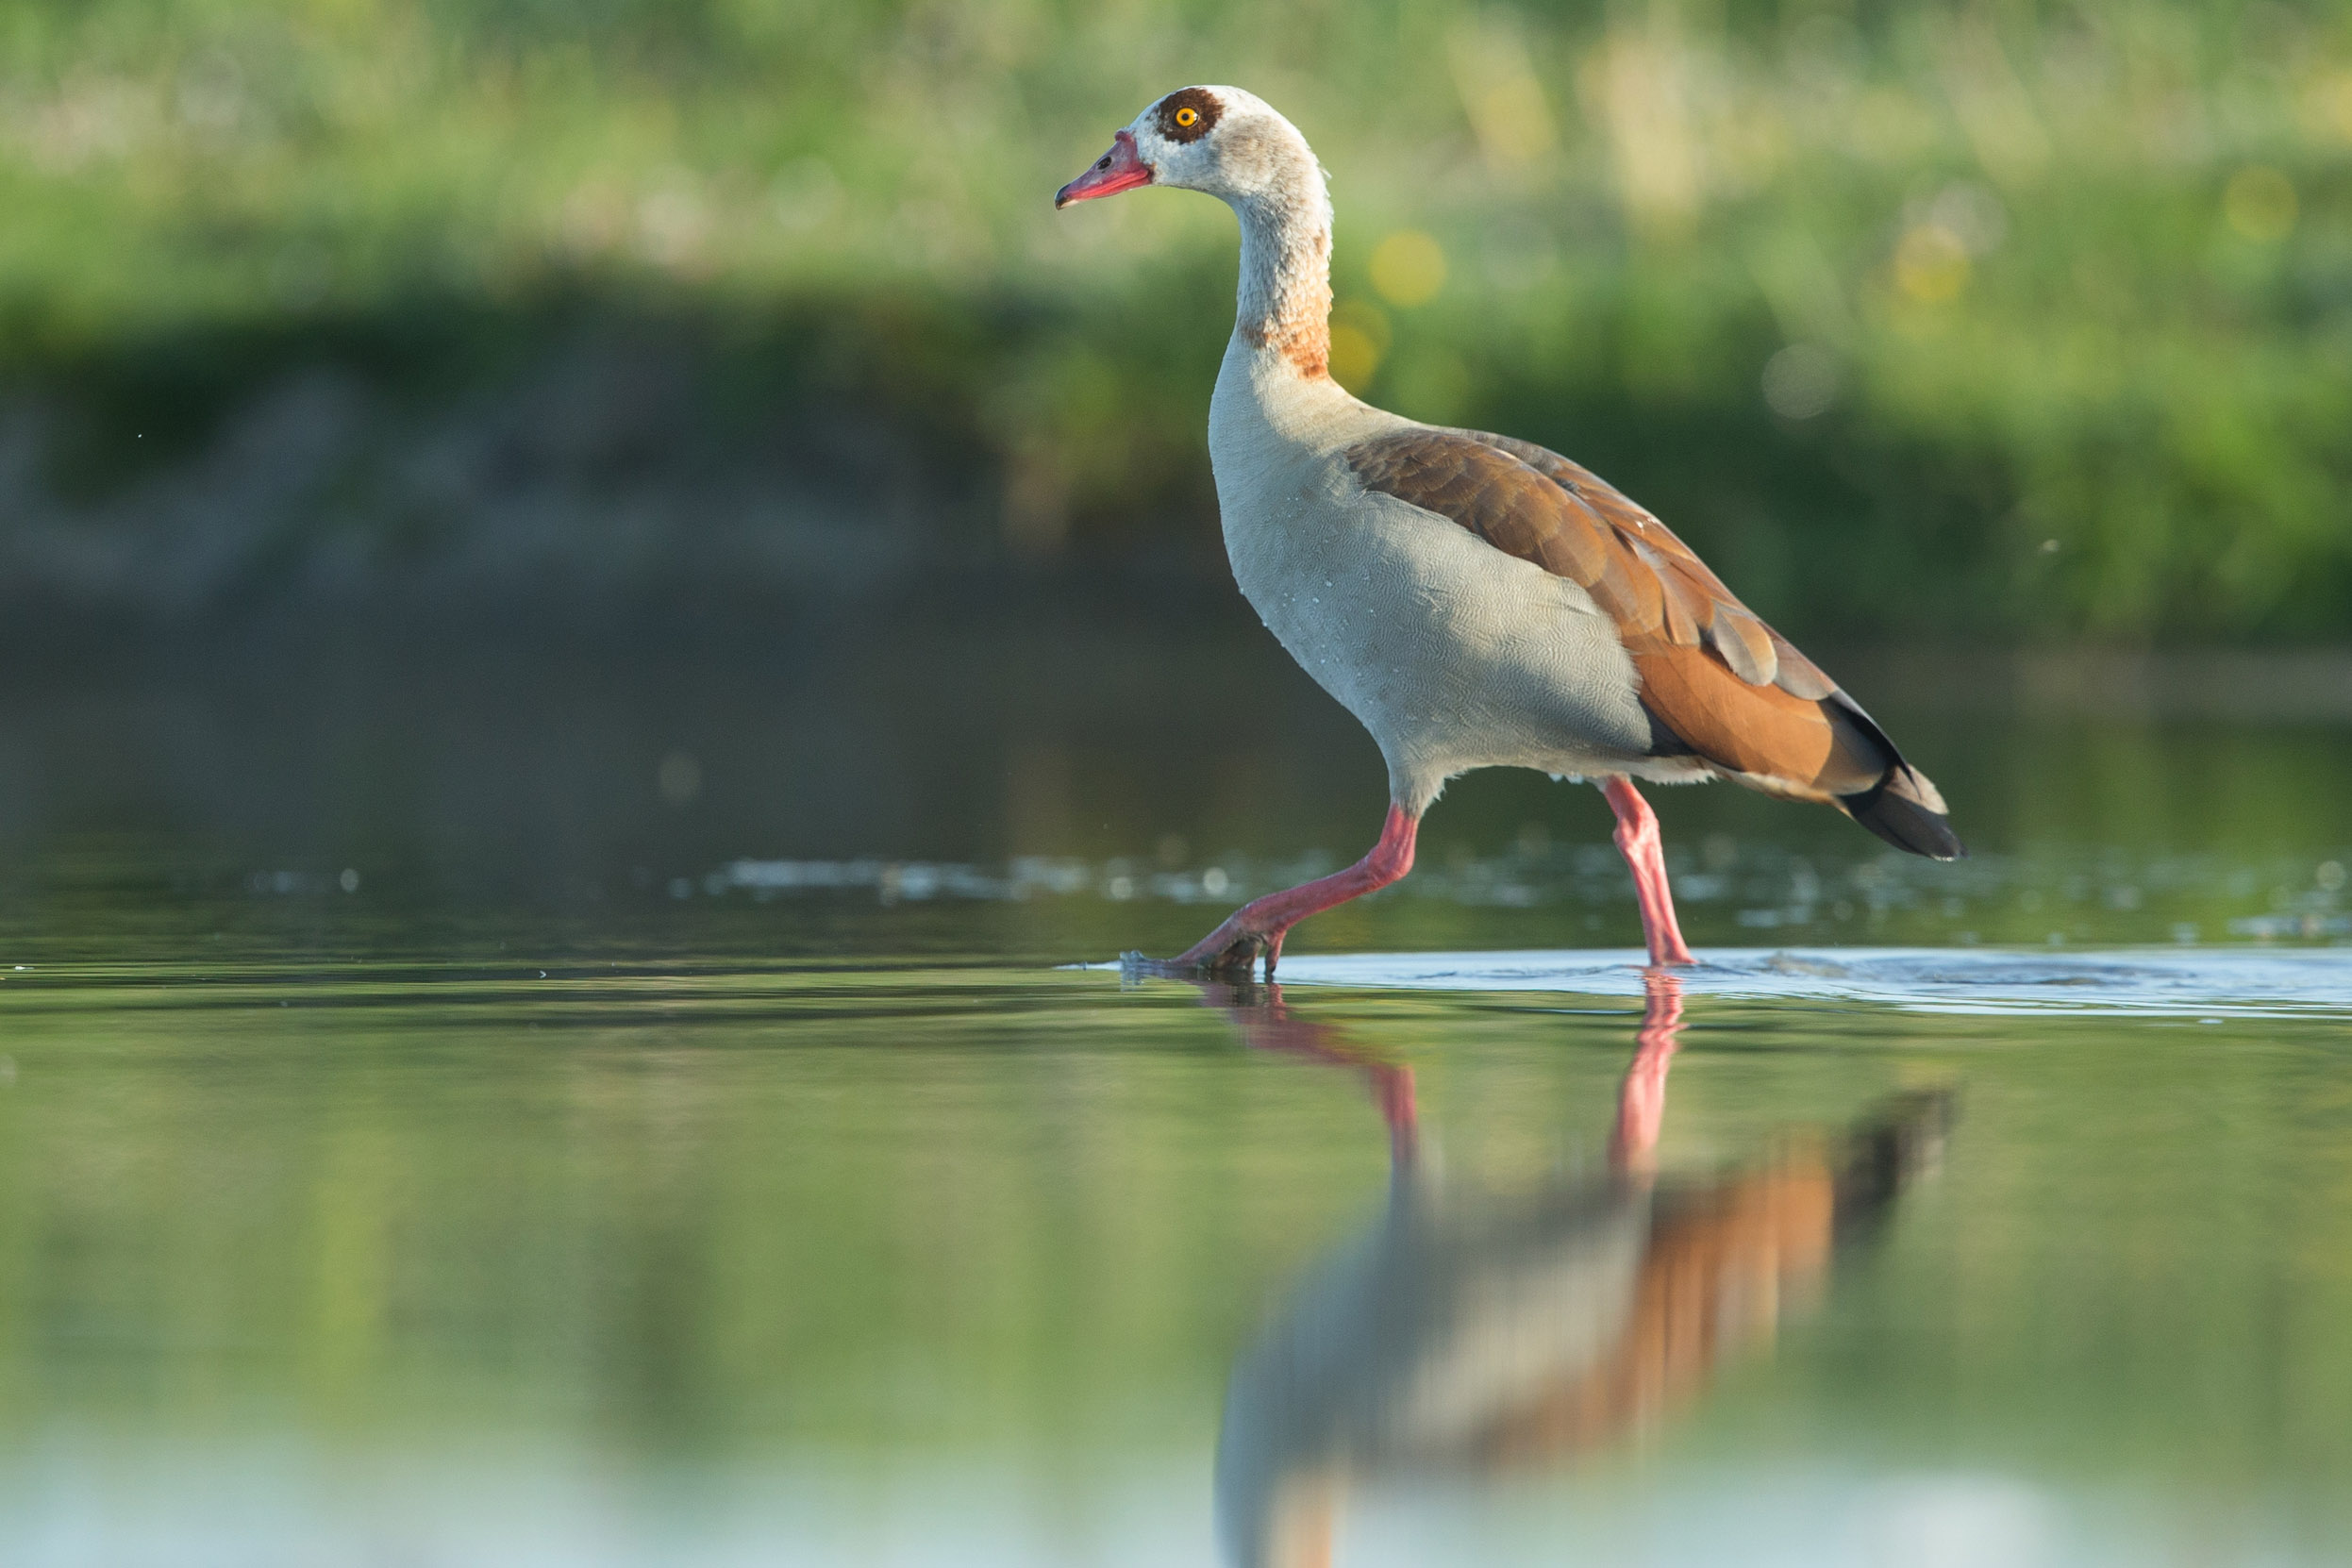 An Egyptian Goose walking on shallow waters of a lake.